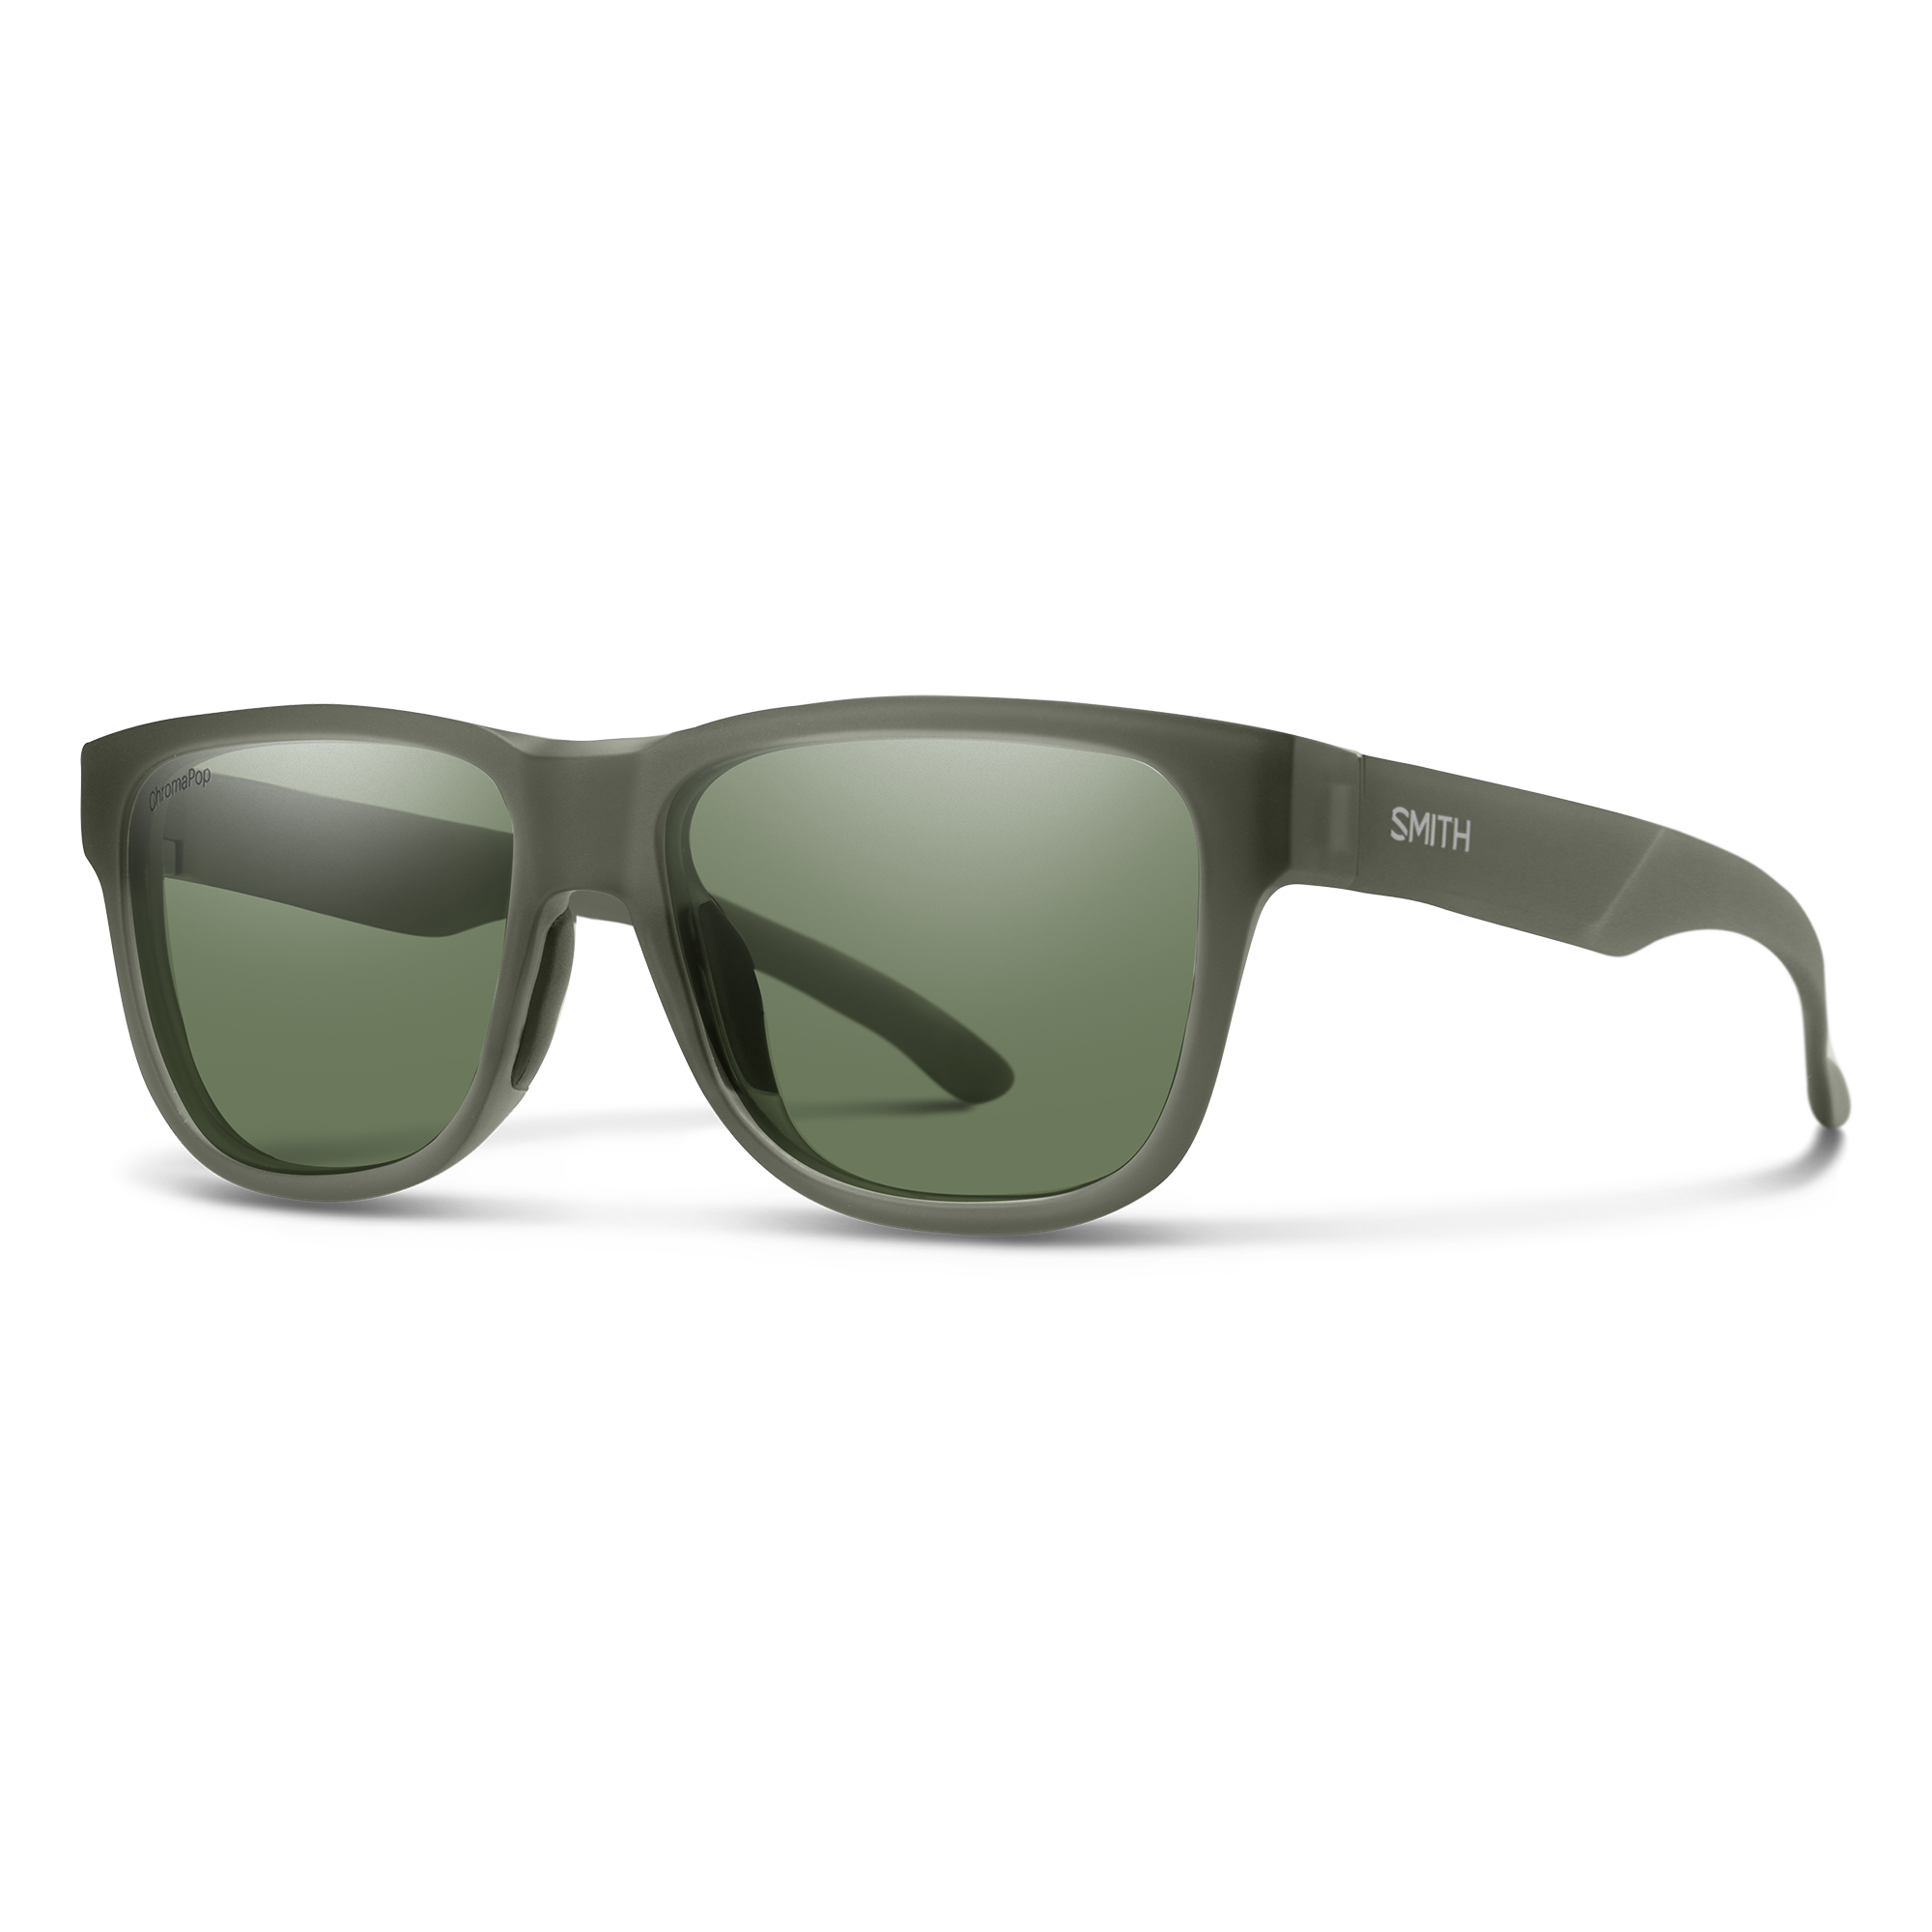 Shop the SMITH Outlier 2 online at SportRx. Available in prescription. |  Smith outlier, Smith, Smith sunglasses